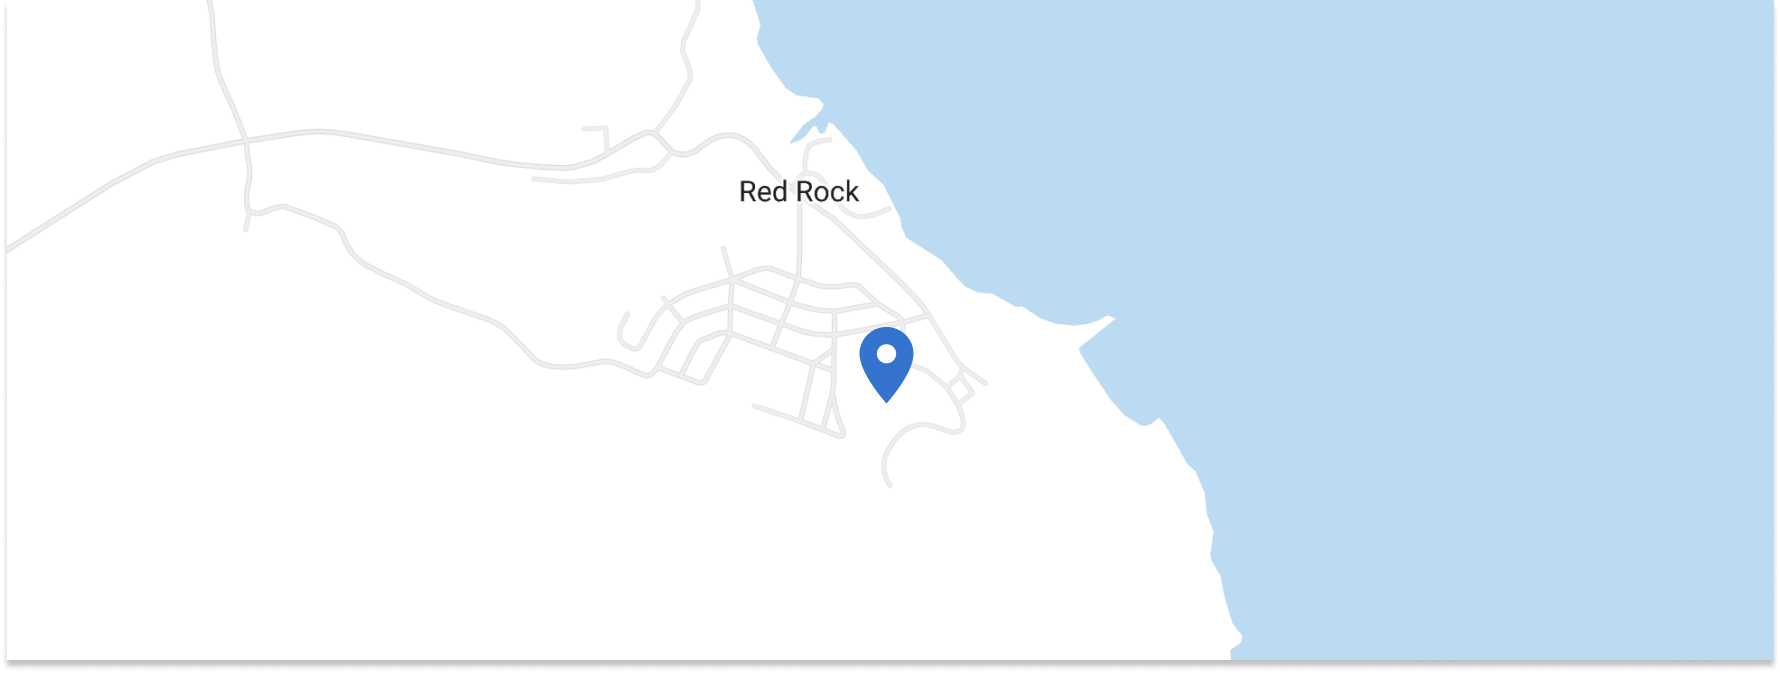 Red Rock BESS Project Location with Blue Pin